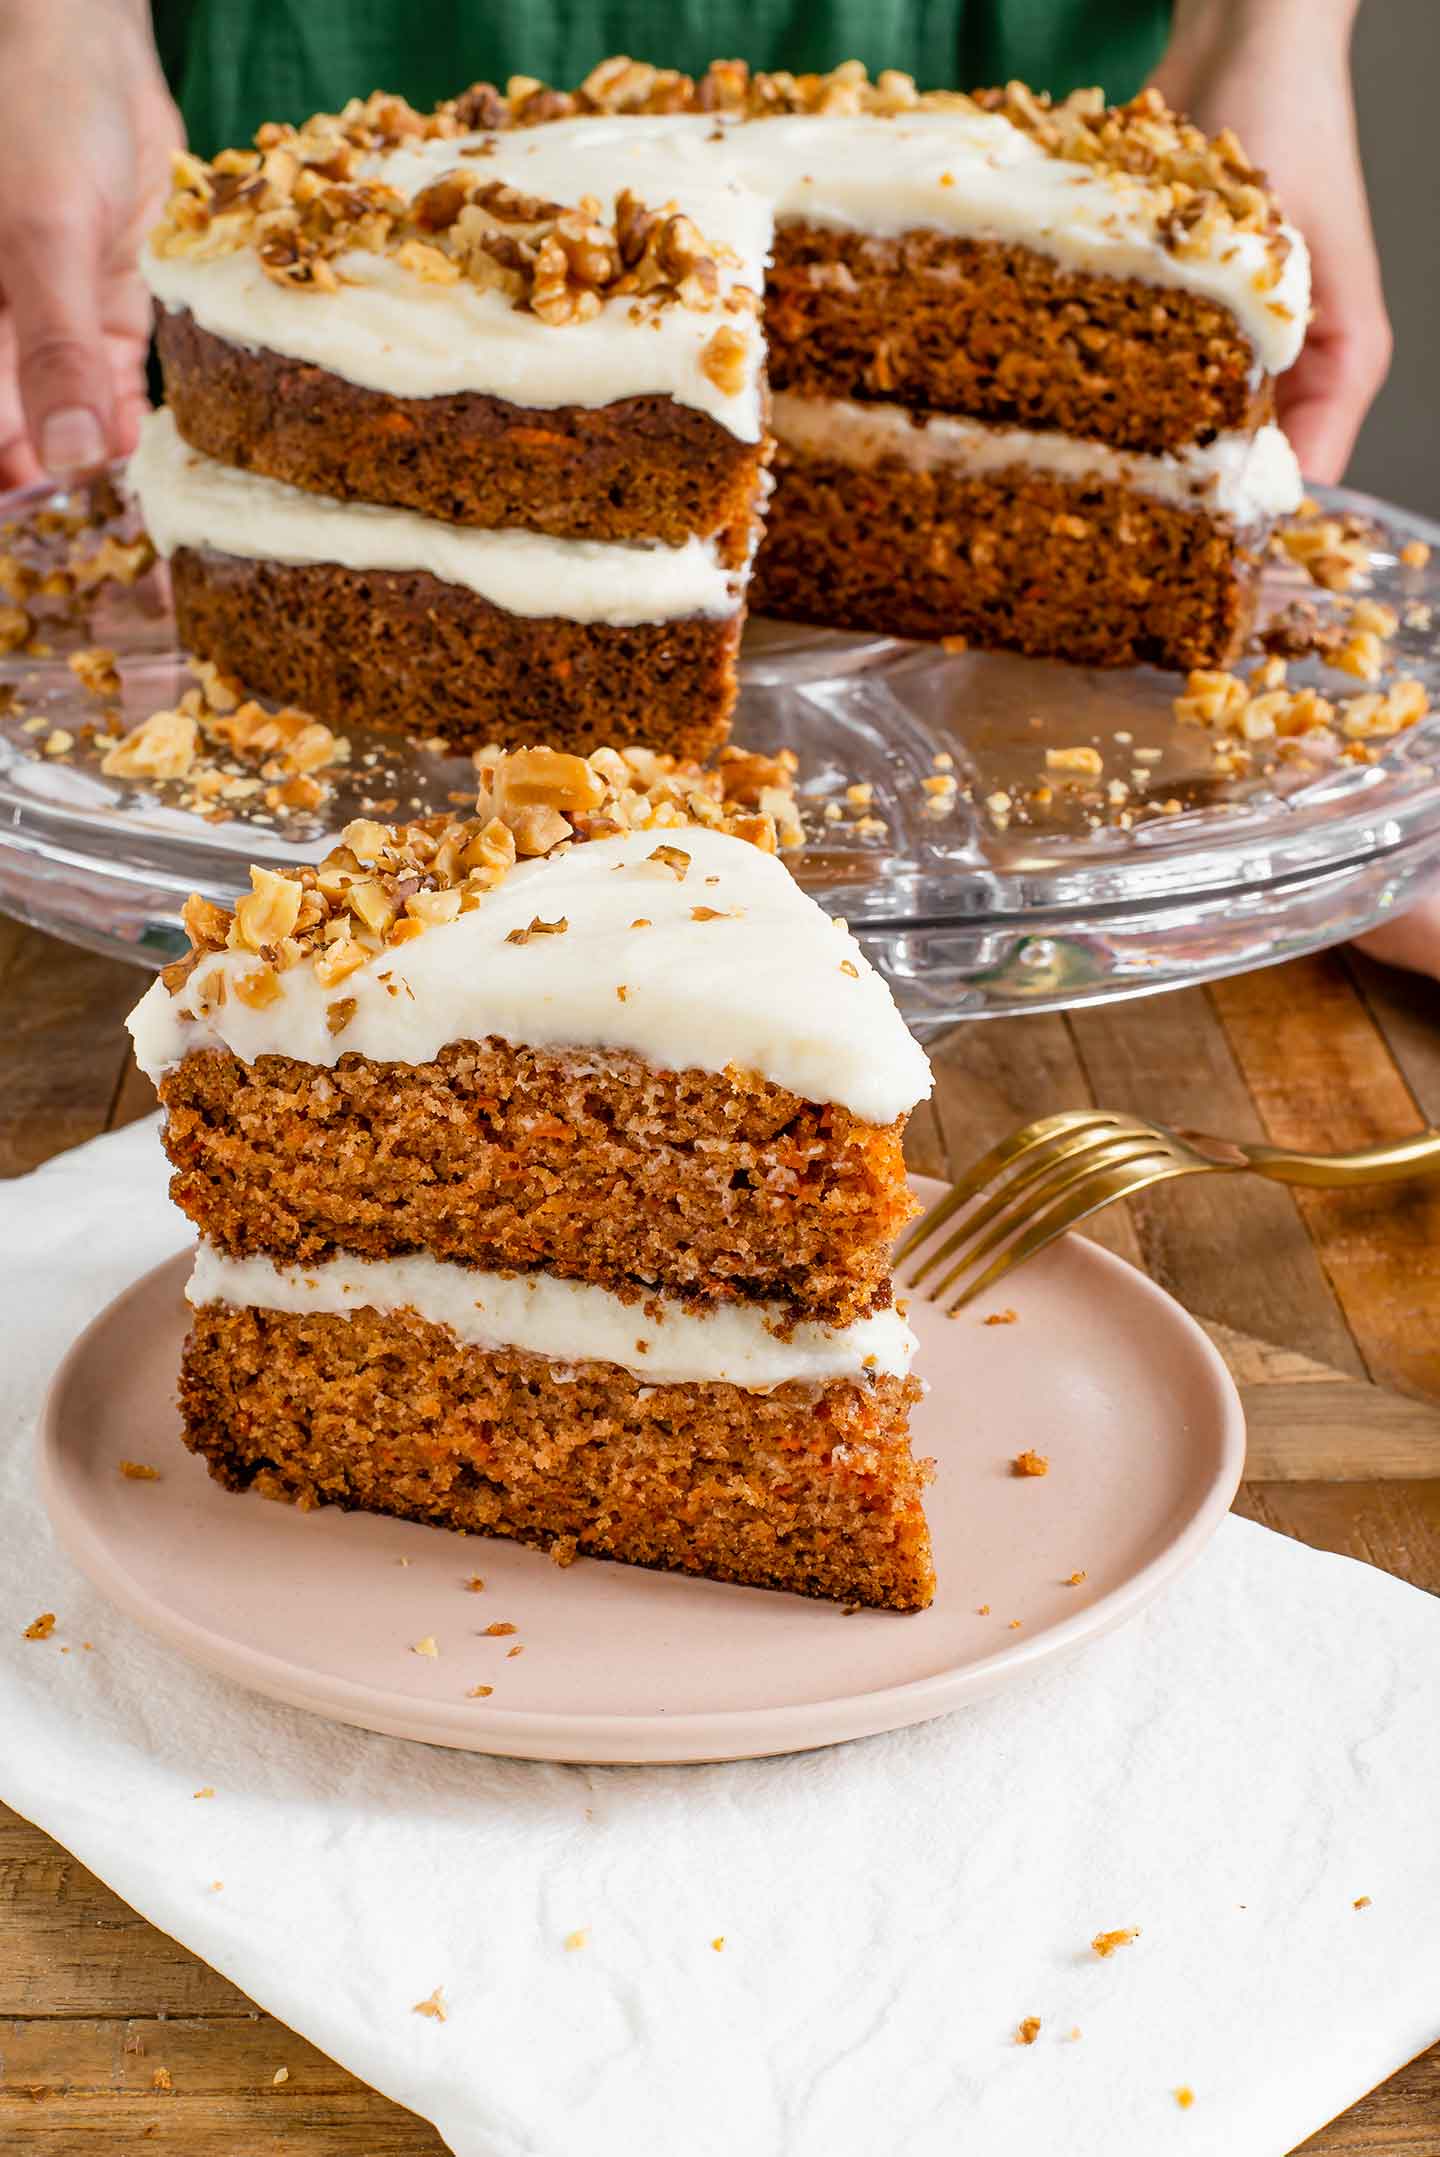 Side view of a large slice of vegan carrot cake with dairy-free cream cheese frosting. The rest of the cake is on a cake stand in the background.